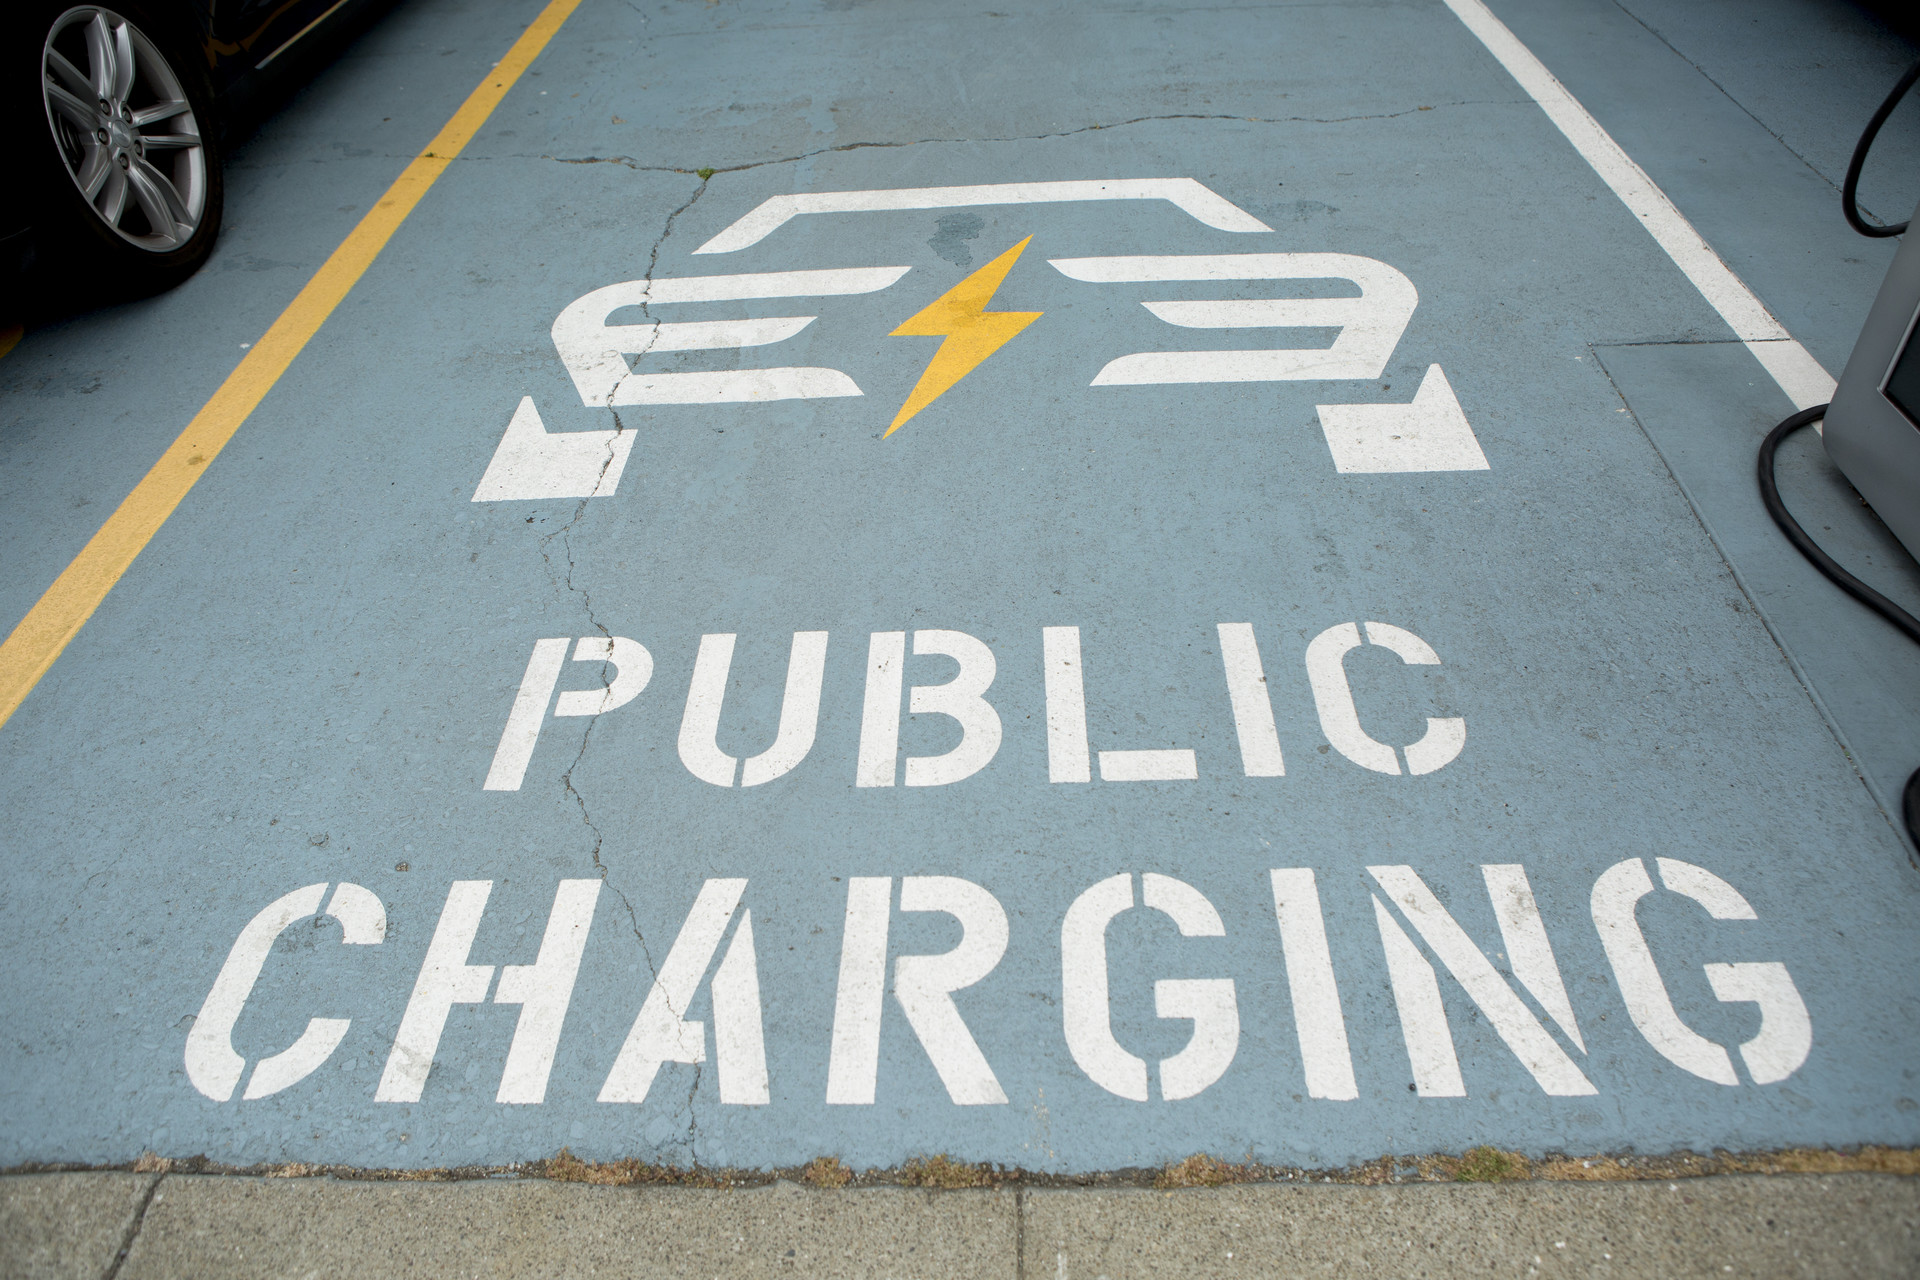 A public parking space is marked with the words "public charging." An icon of a car with a lightning bolt is pictured above the parking space.